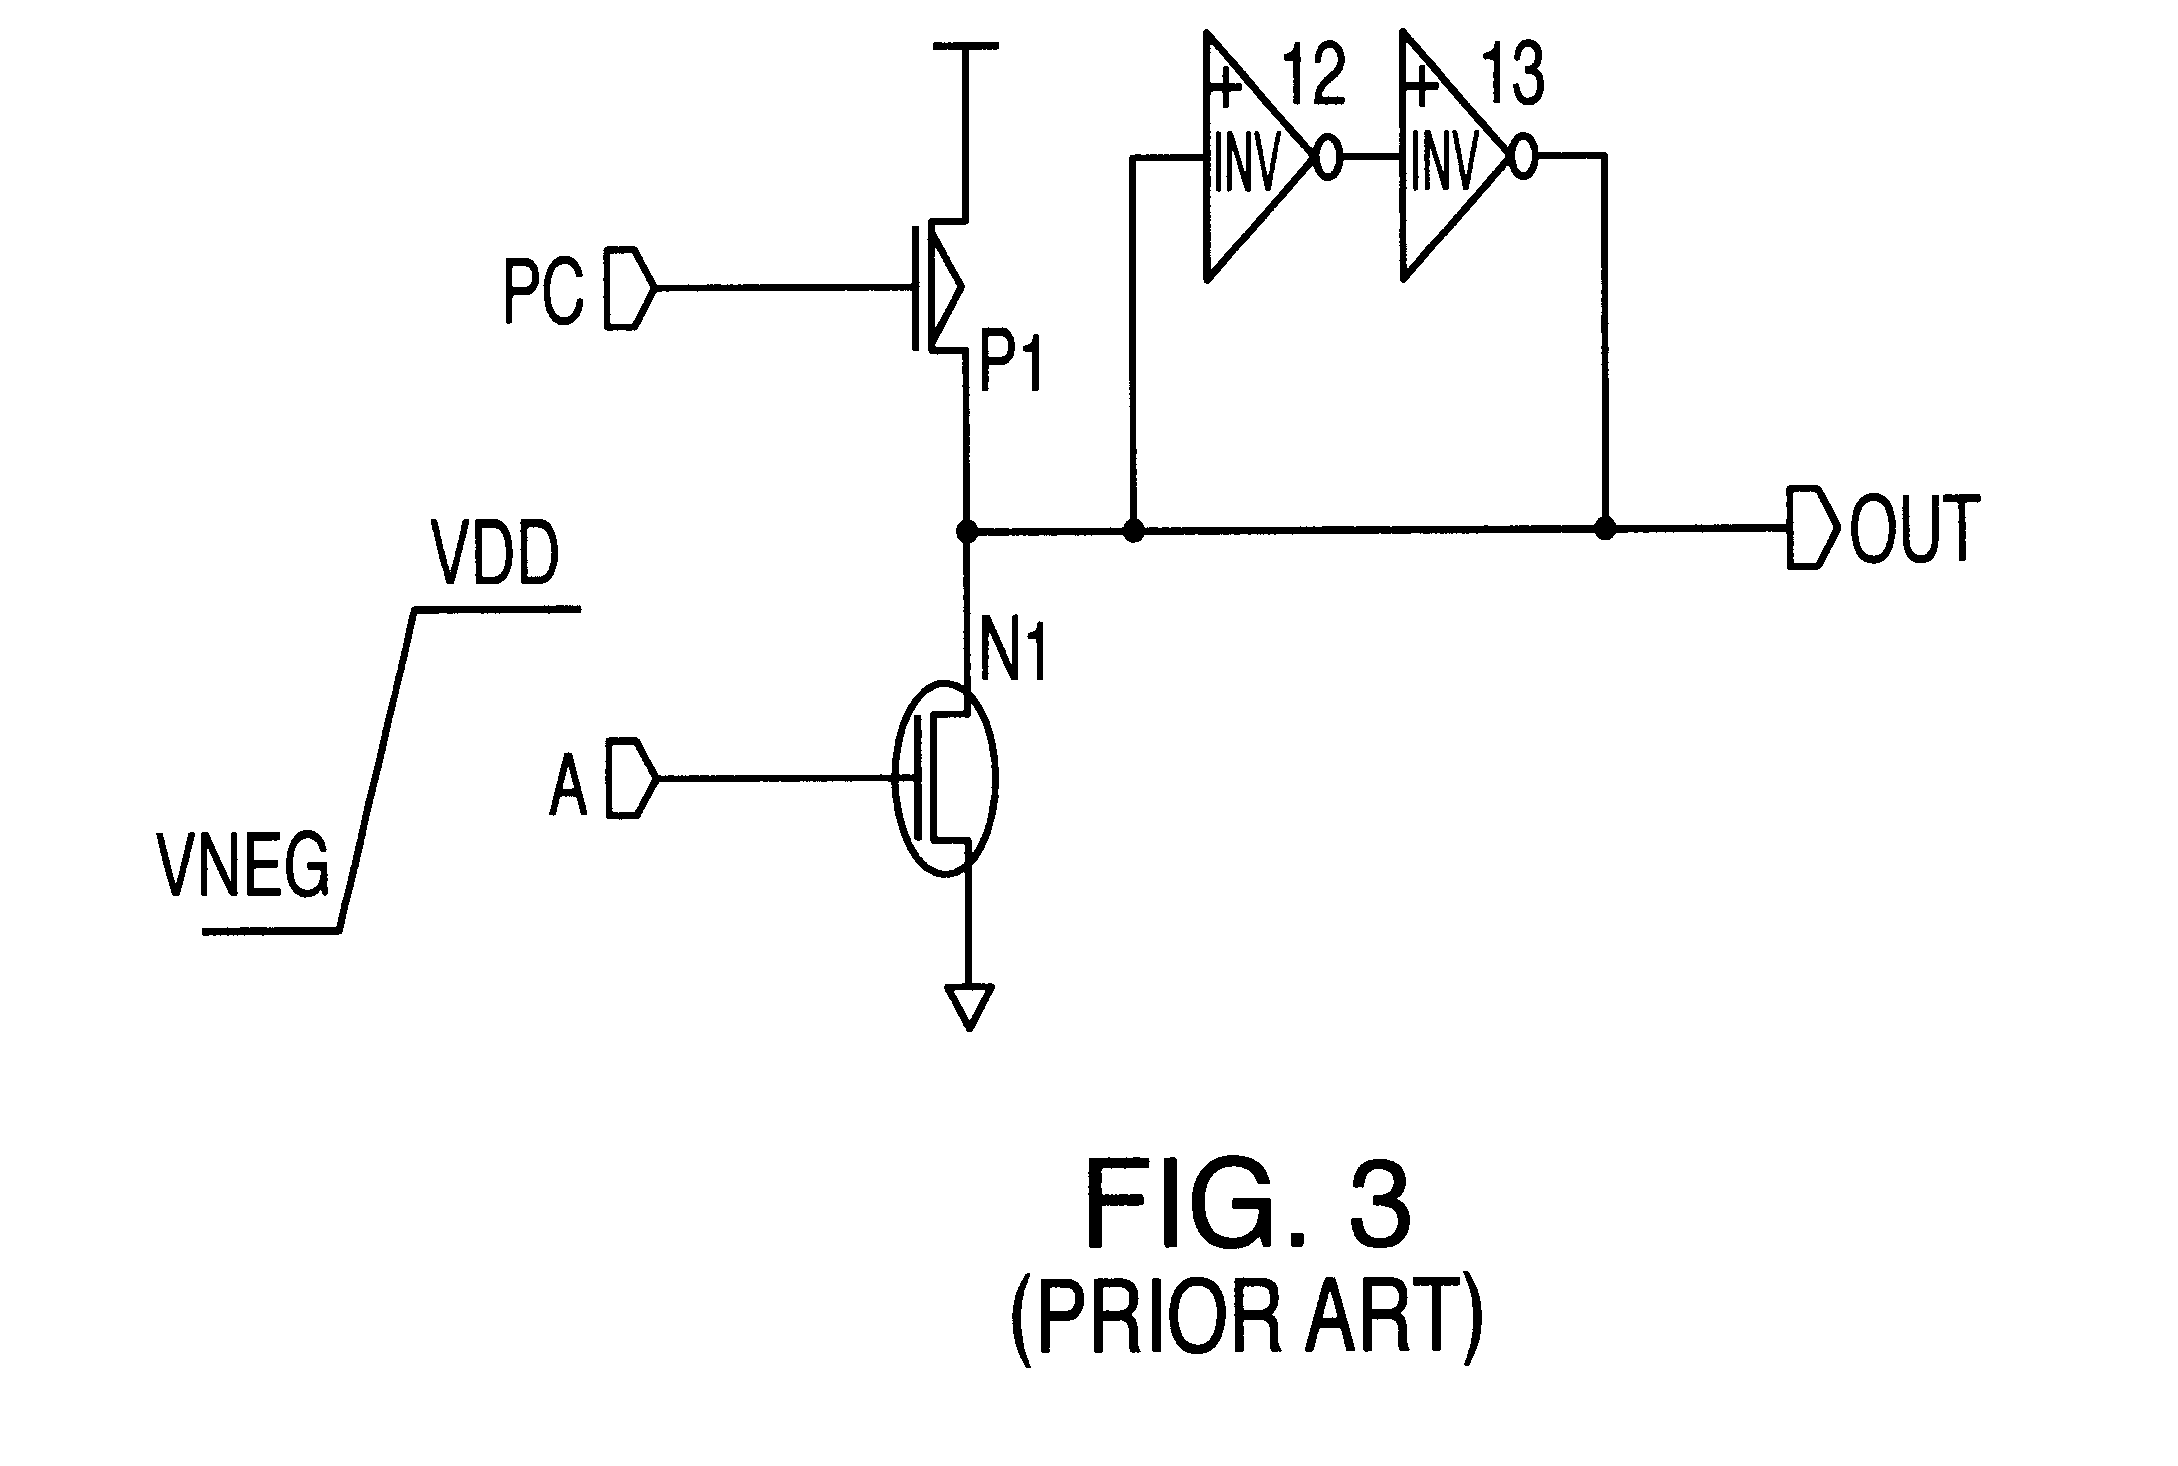 Method of reducing sub-threshold leakage in circuits during standby mode